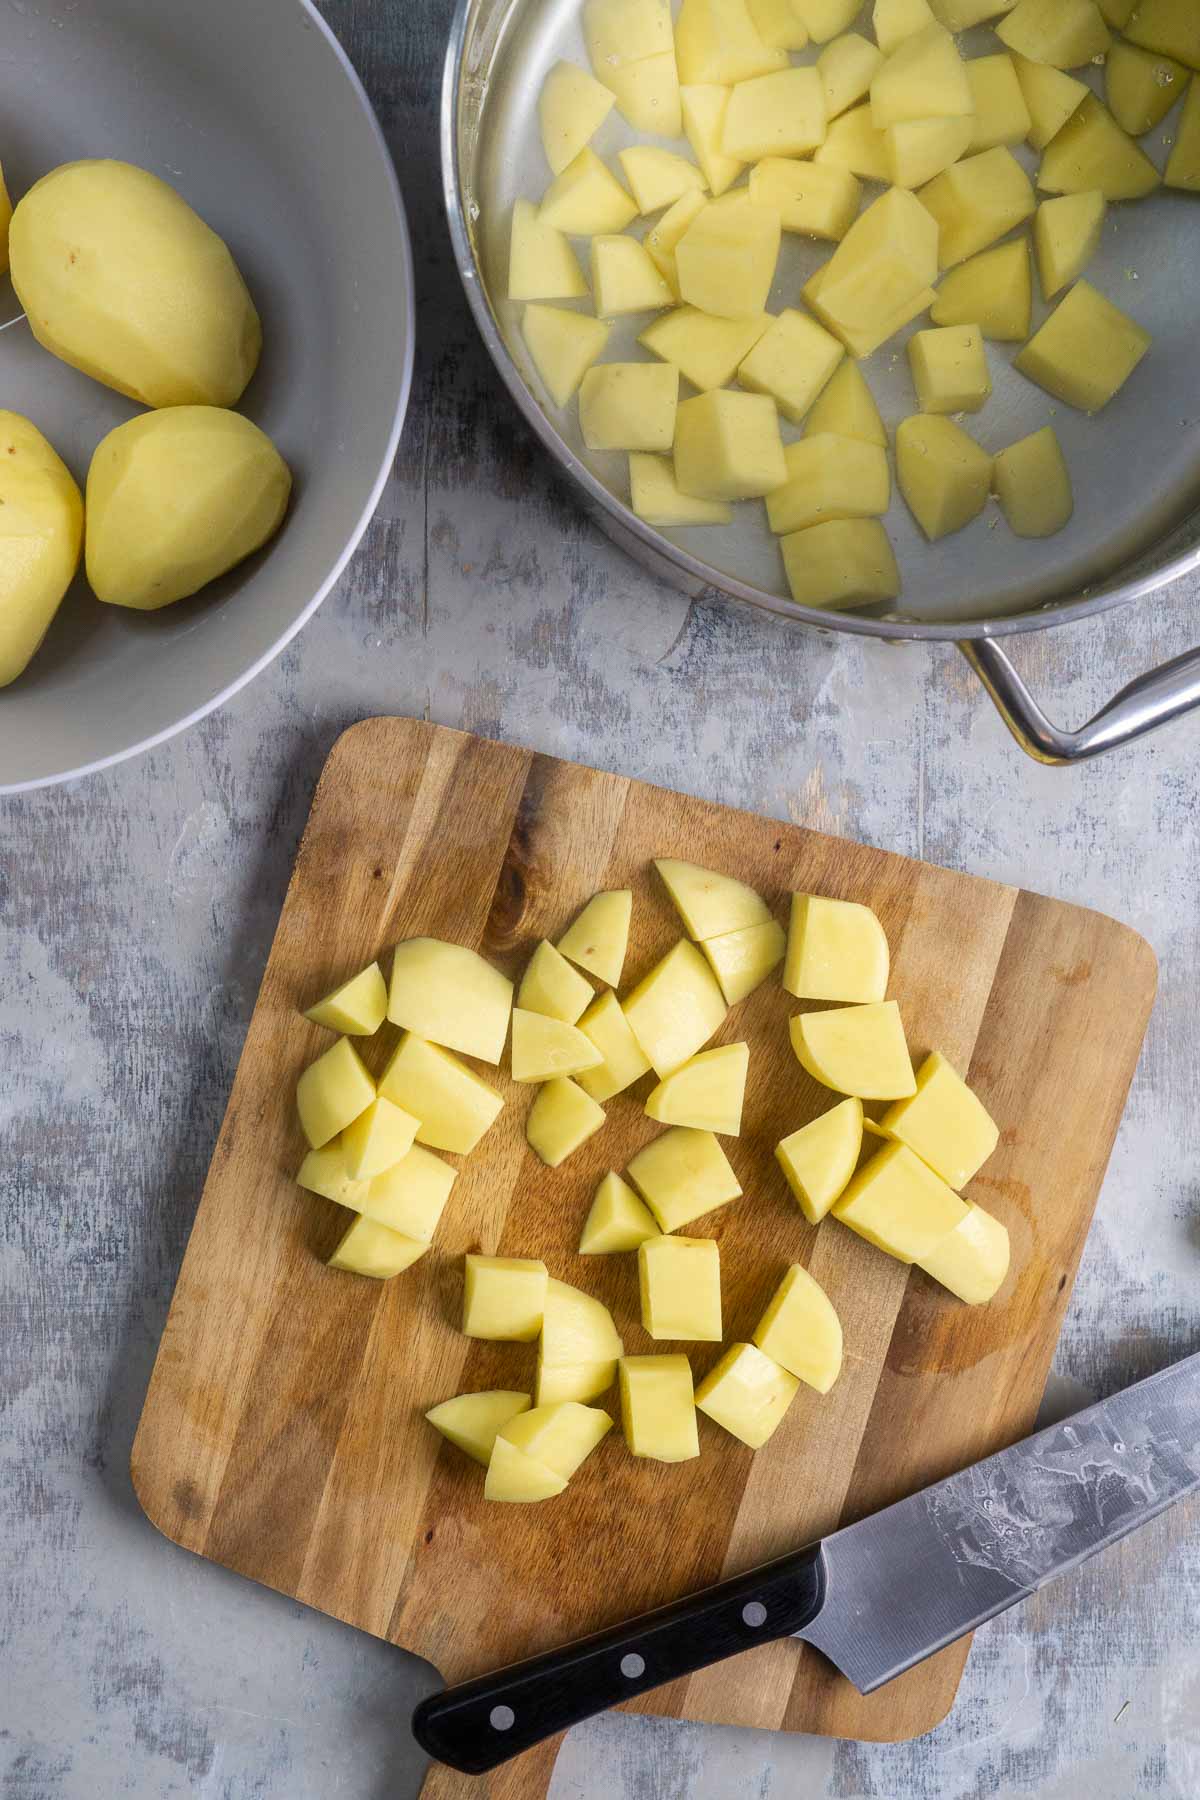 chef knife and chopped potatoes on cutting board next to stainless pot with diced potatoes next to peeled whole potatoes in bowl